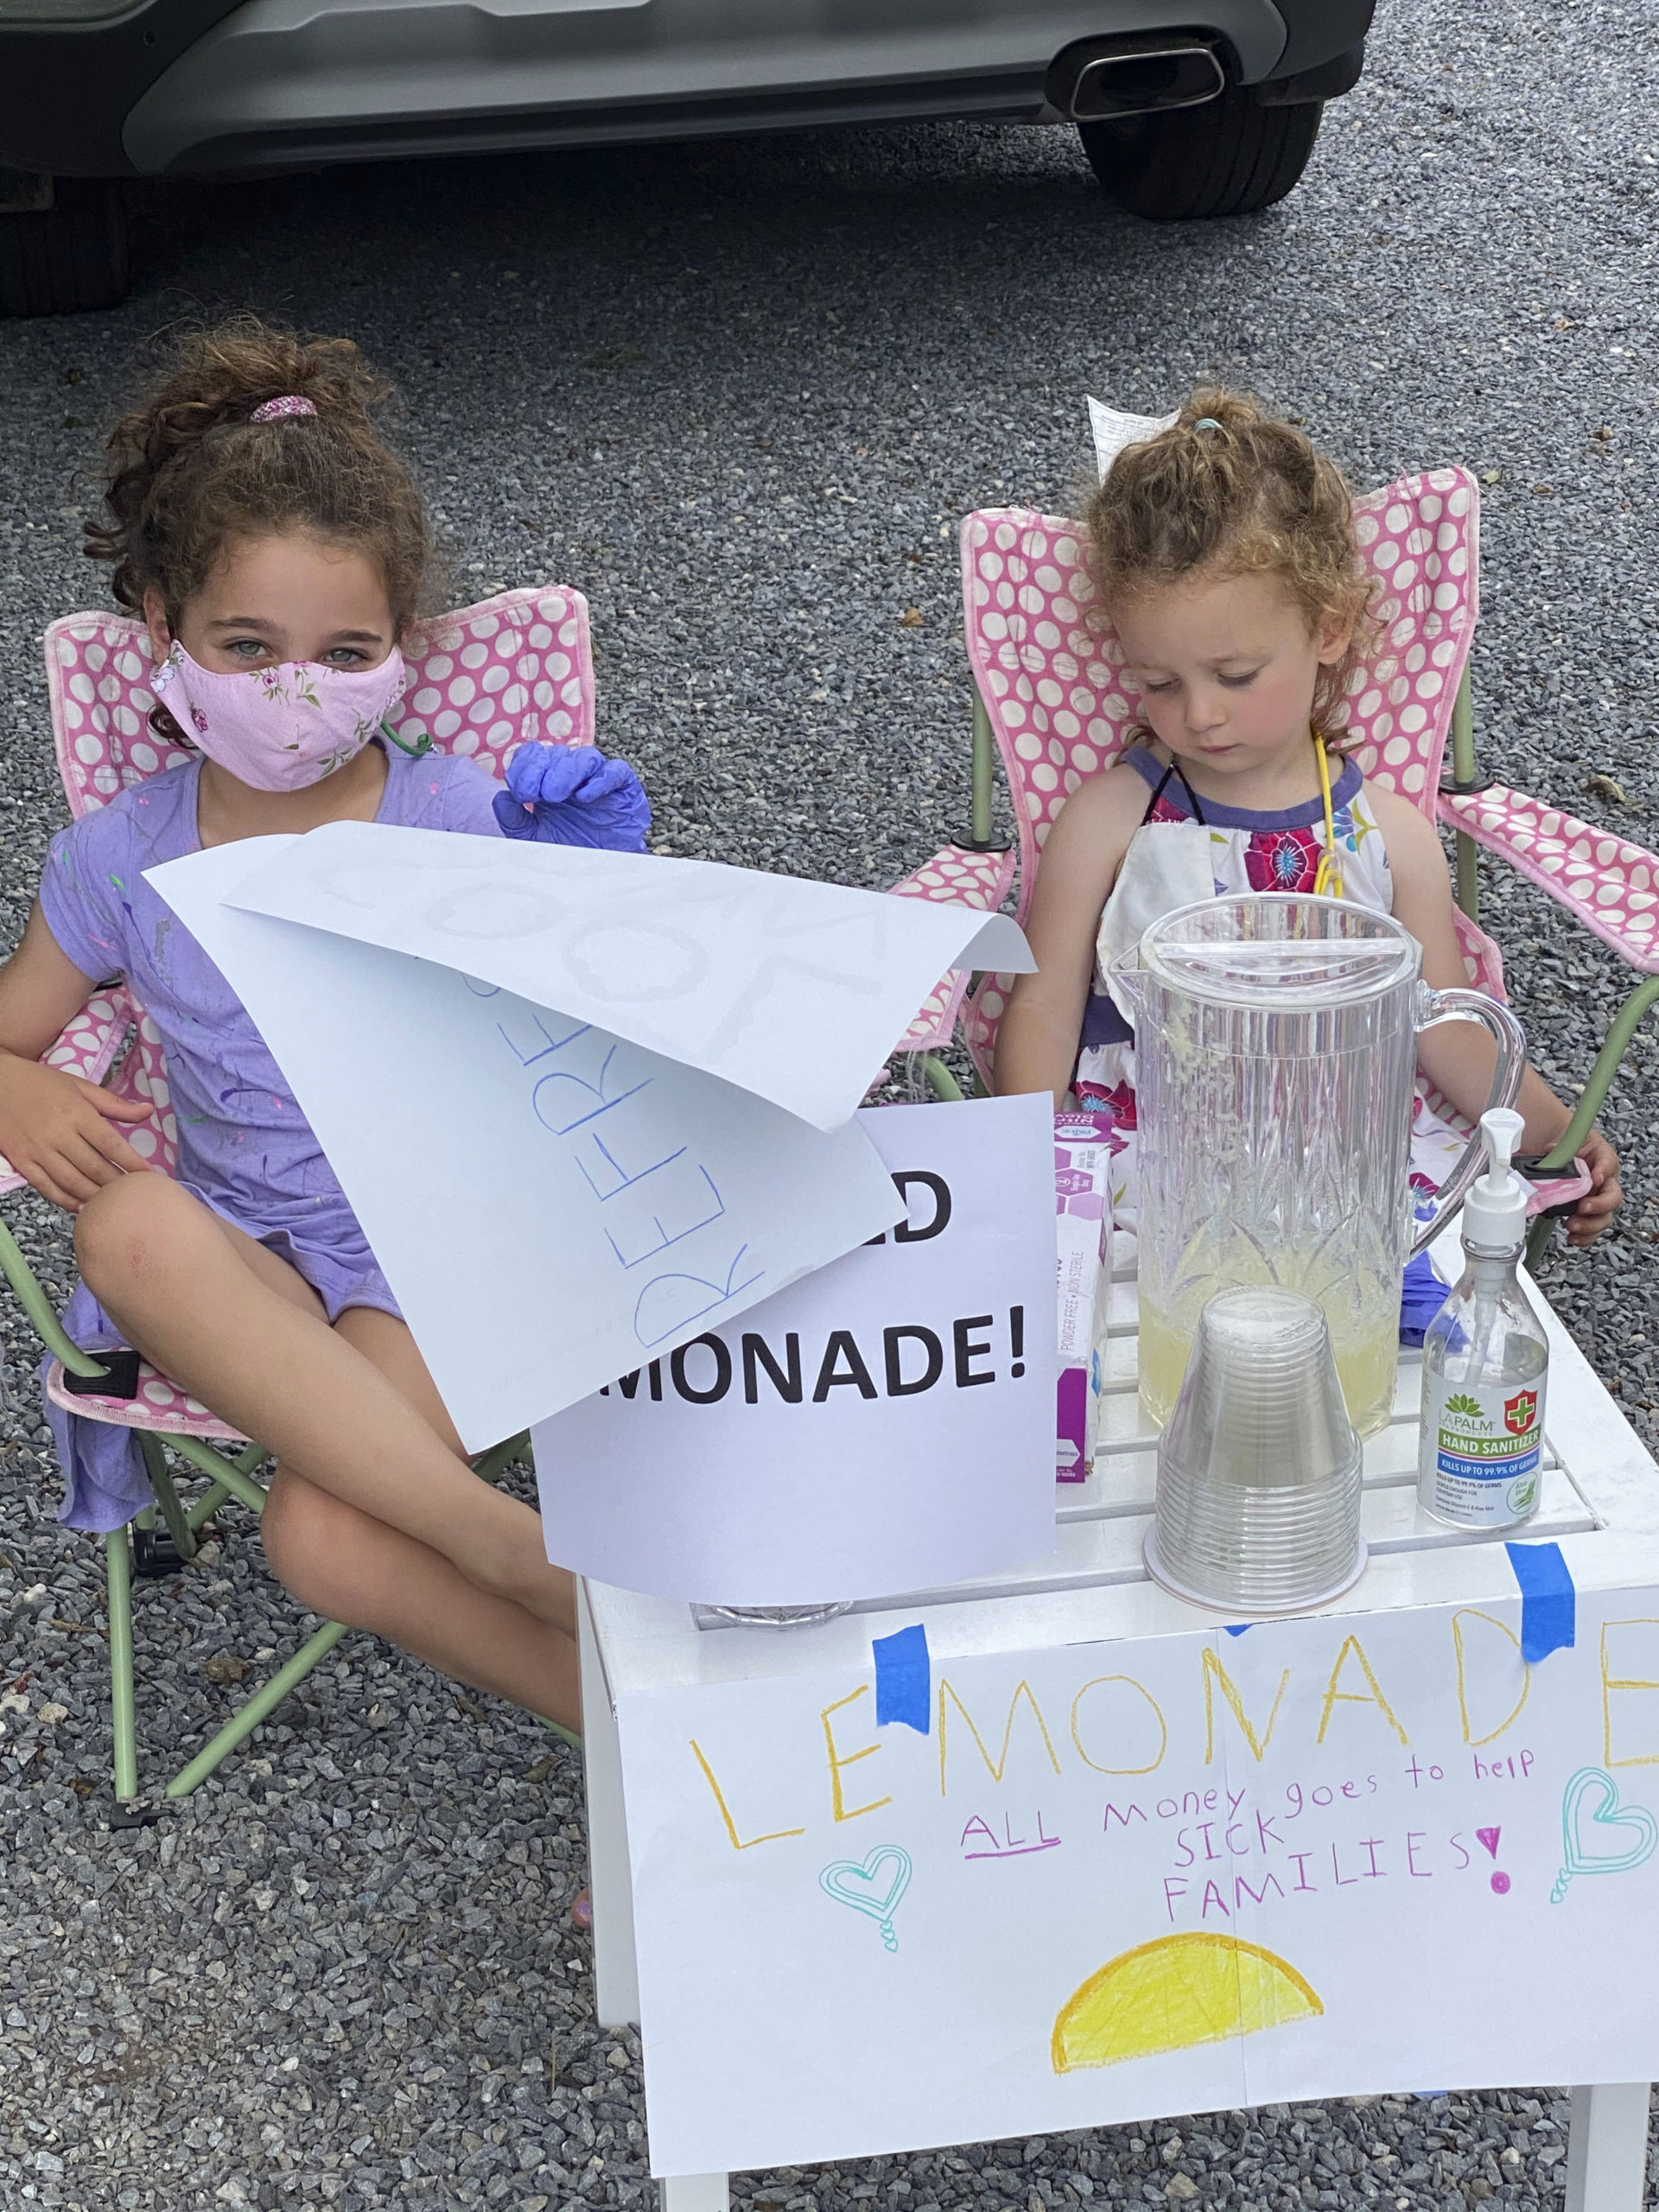 Dylan Ehrlich, 6, and Logan Ehrlich, 2, residing in East Hampton Village for the summer ran a lemonade stand on Friday and Saturday and raised $94 which they are donating to the local hospital.  COURTESY STEPHEN FRISHBERG